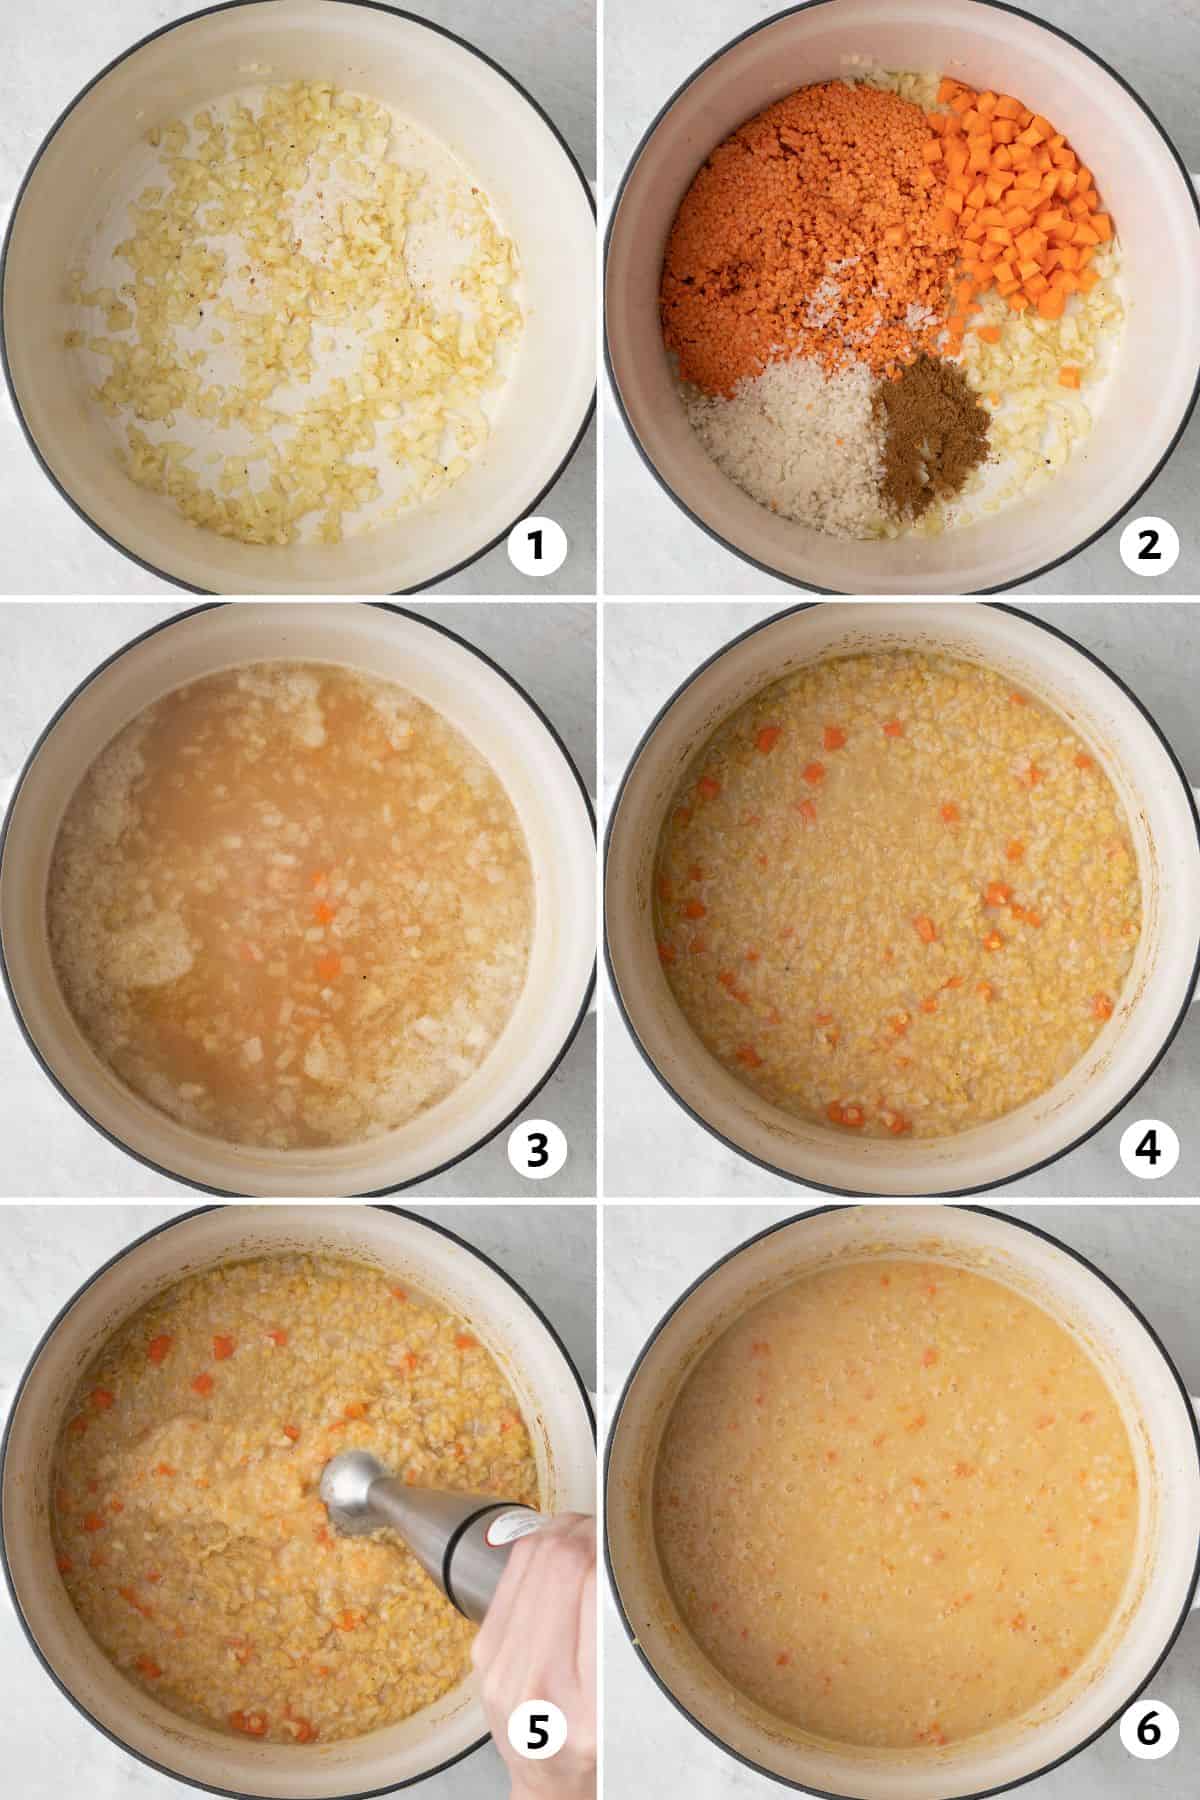 6 image collage making recipe in one pot: 1- onions after cooking, 2- carrots, lentils, rice, and cumin added before mixing, 3- after adding water, 4- after cooked and thickened, 5- immersion dipped in blended up soup, 6- final soup.